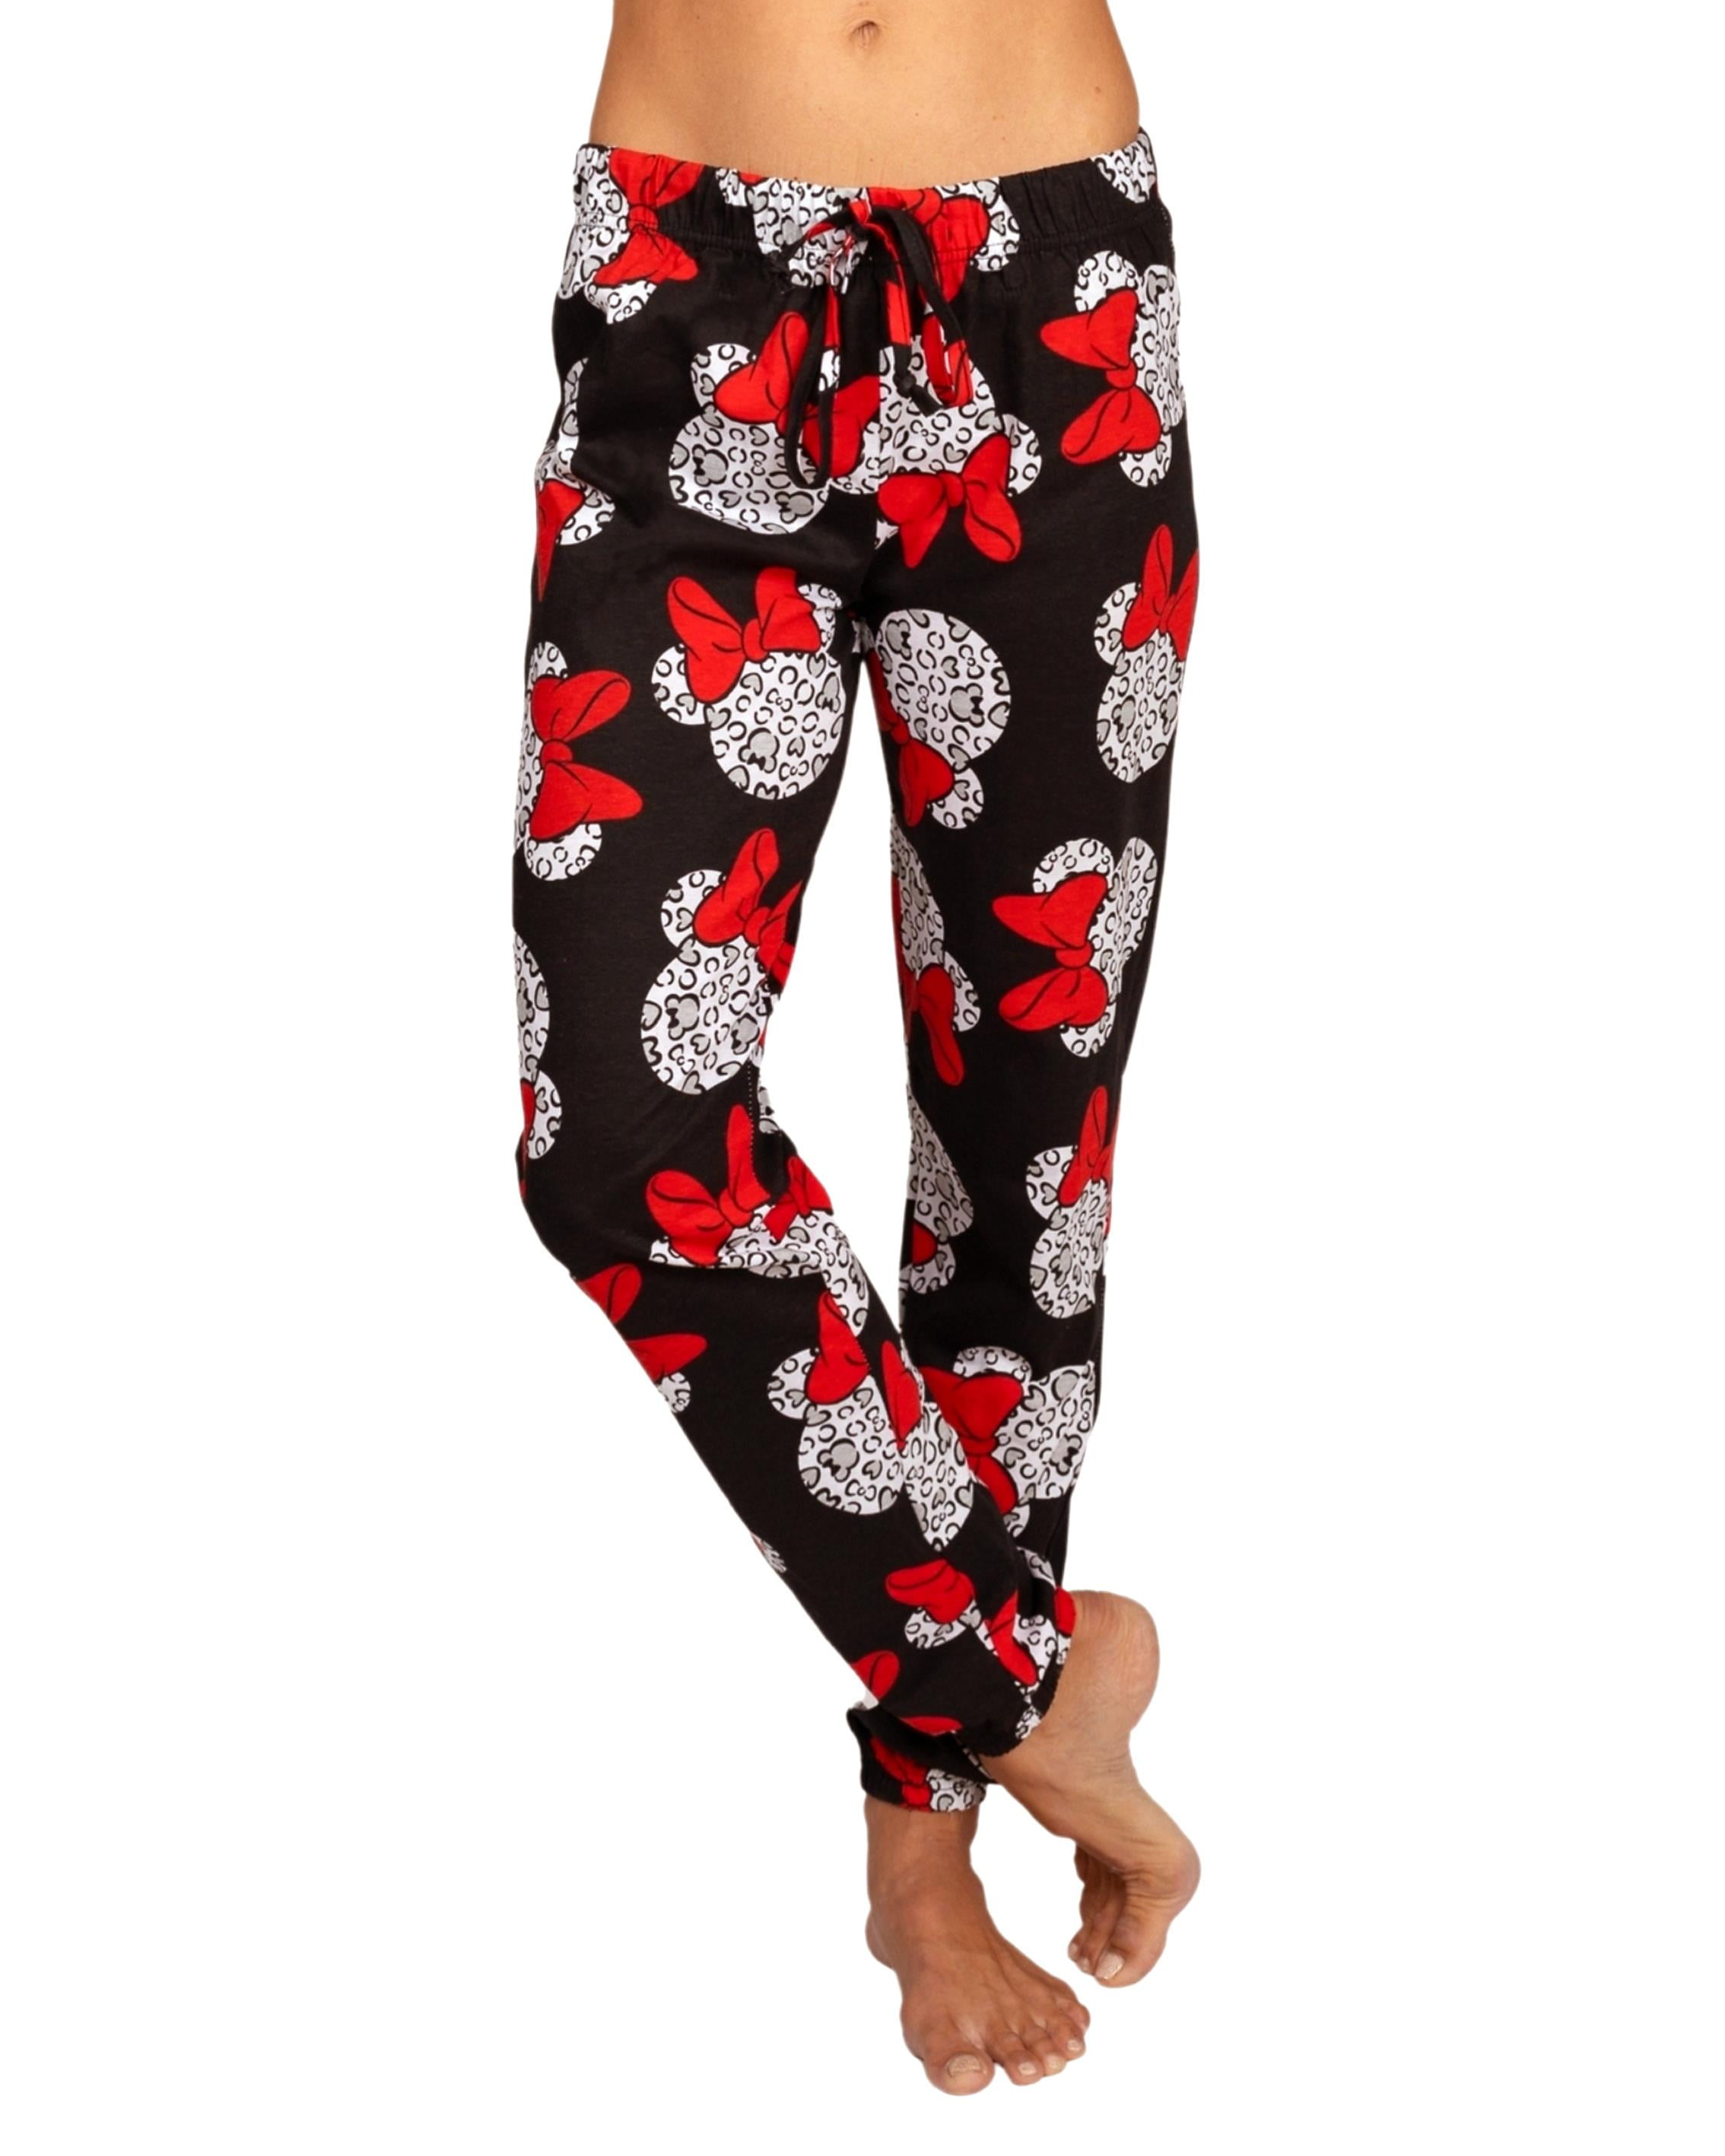 Sesame Street Ladie's Jogger. These comfy joggers for woman have